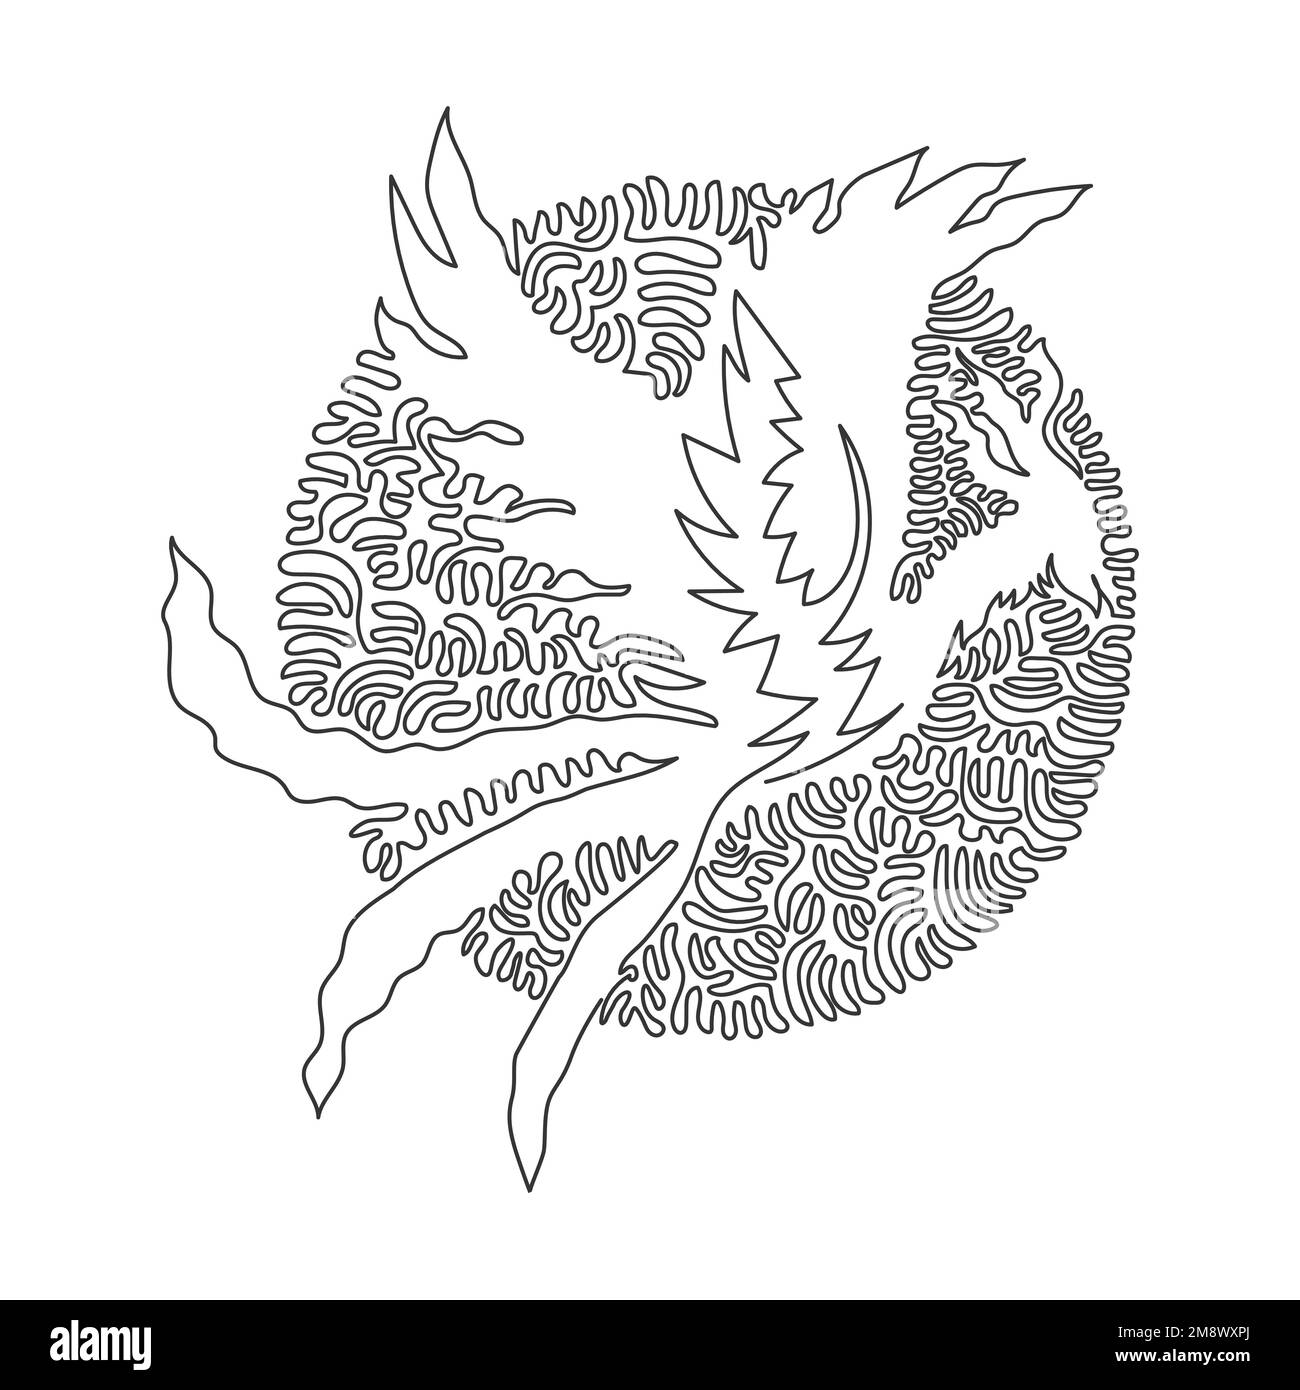 Continuous one curve line drawing of adorable phoenix abstract art in circle. Single line editable stroke vector illustration of ancient mythical bird Stock Vector